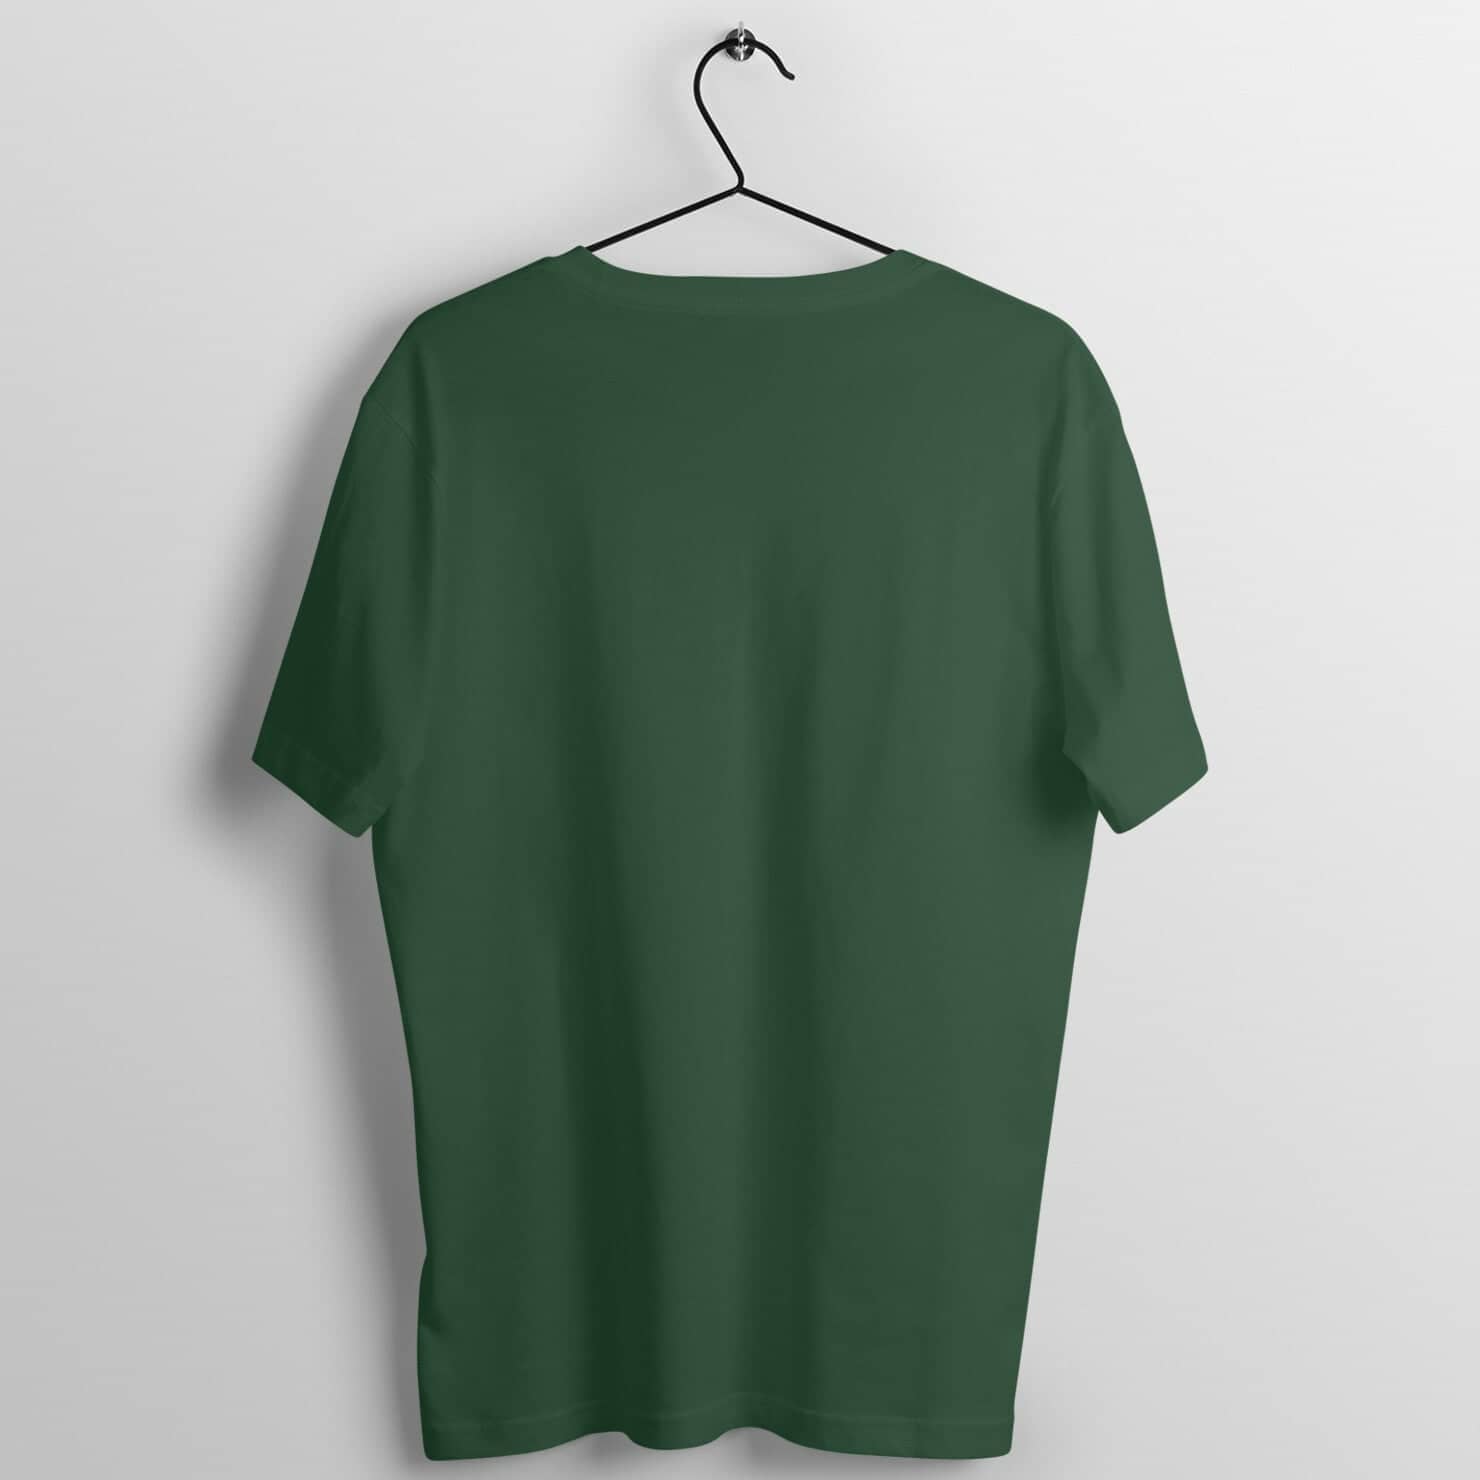 Social Detox Exclusive Olive Green T Shirt for Men and Women Printrove 